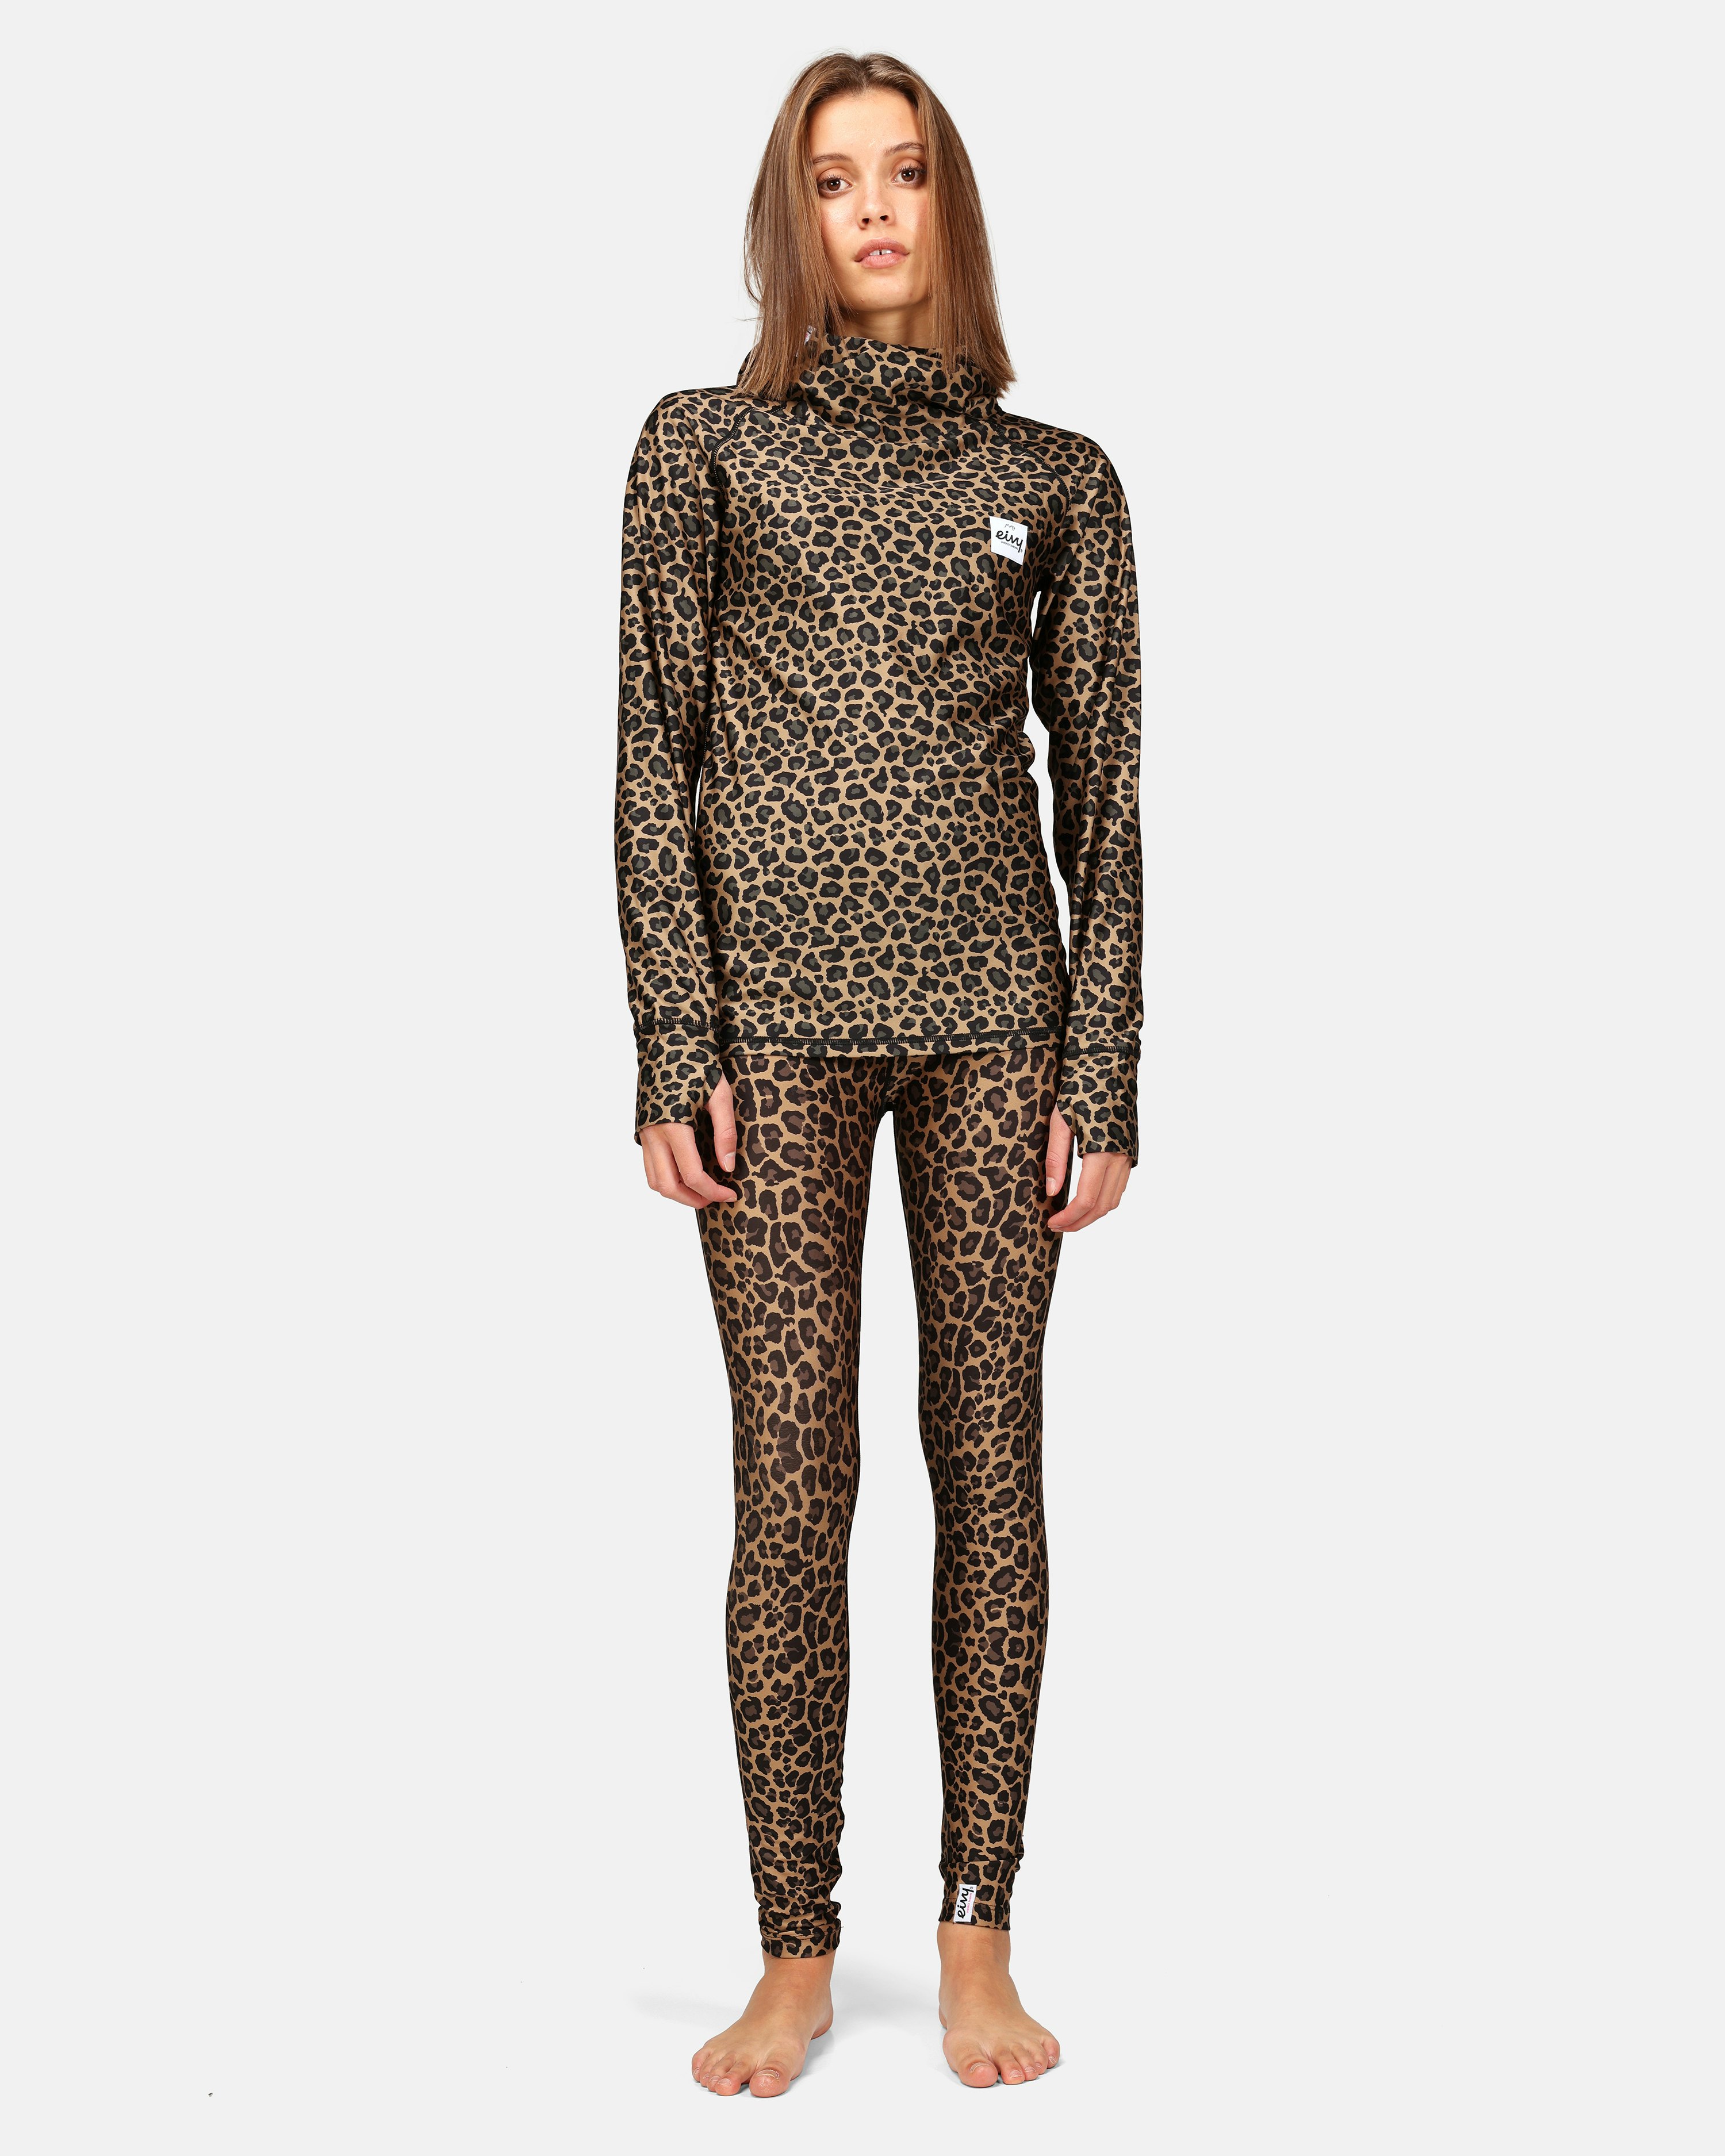 Eivy Icecold base layer legging in leopard